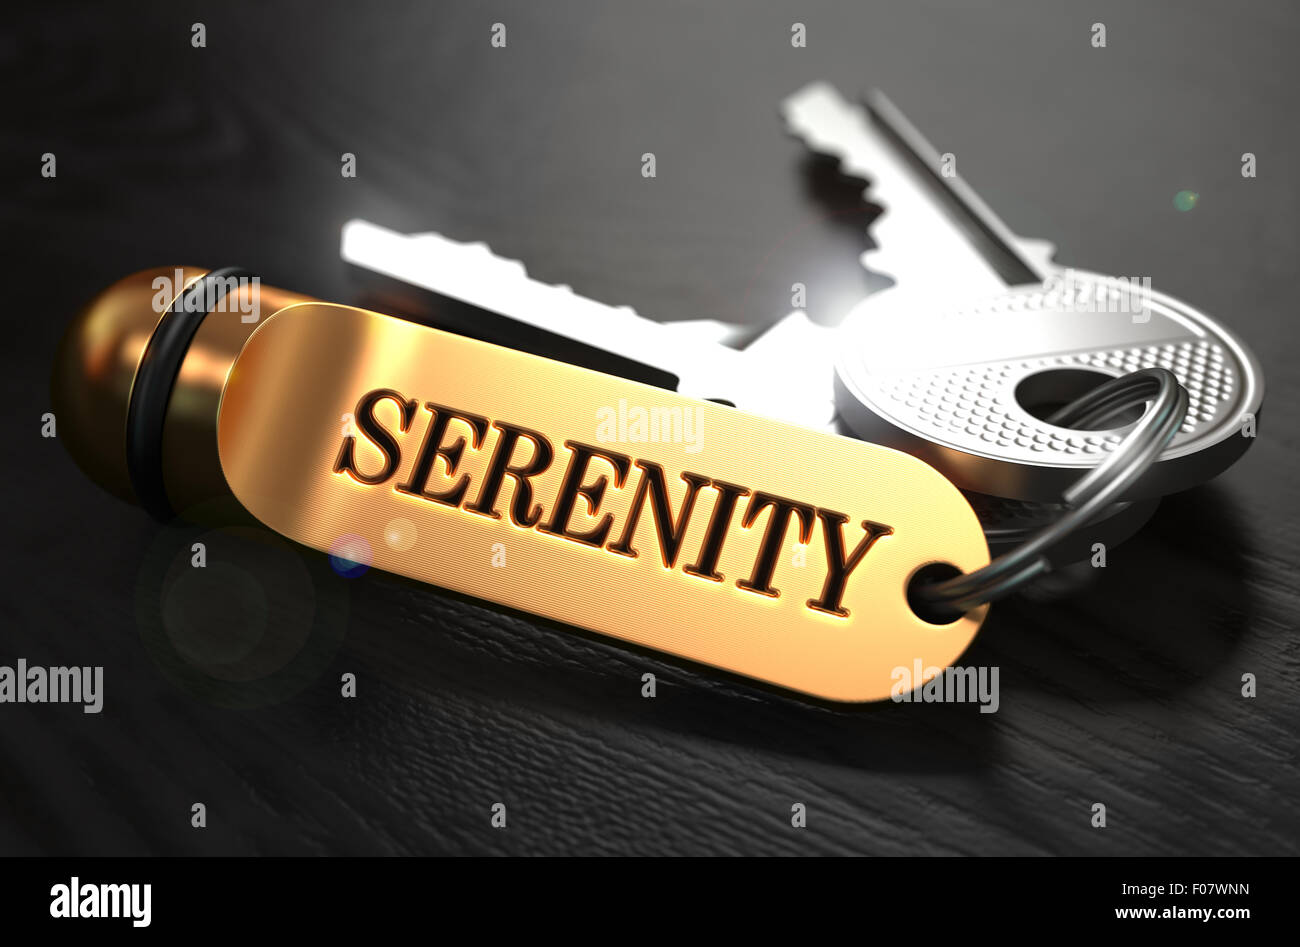 Keys with Word Serenity on Golden Label. Stock Photo